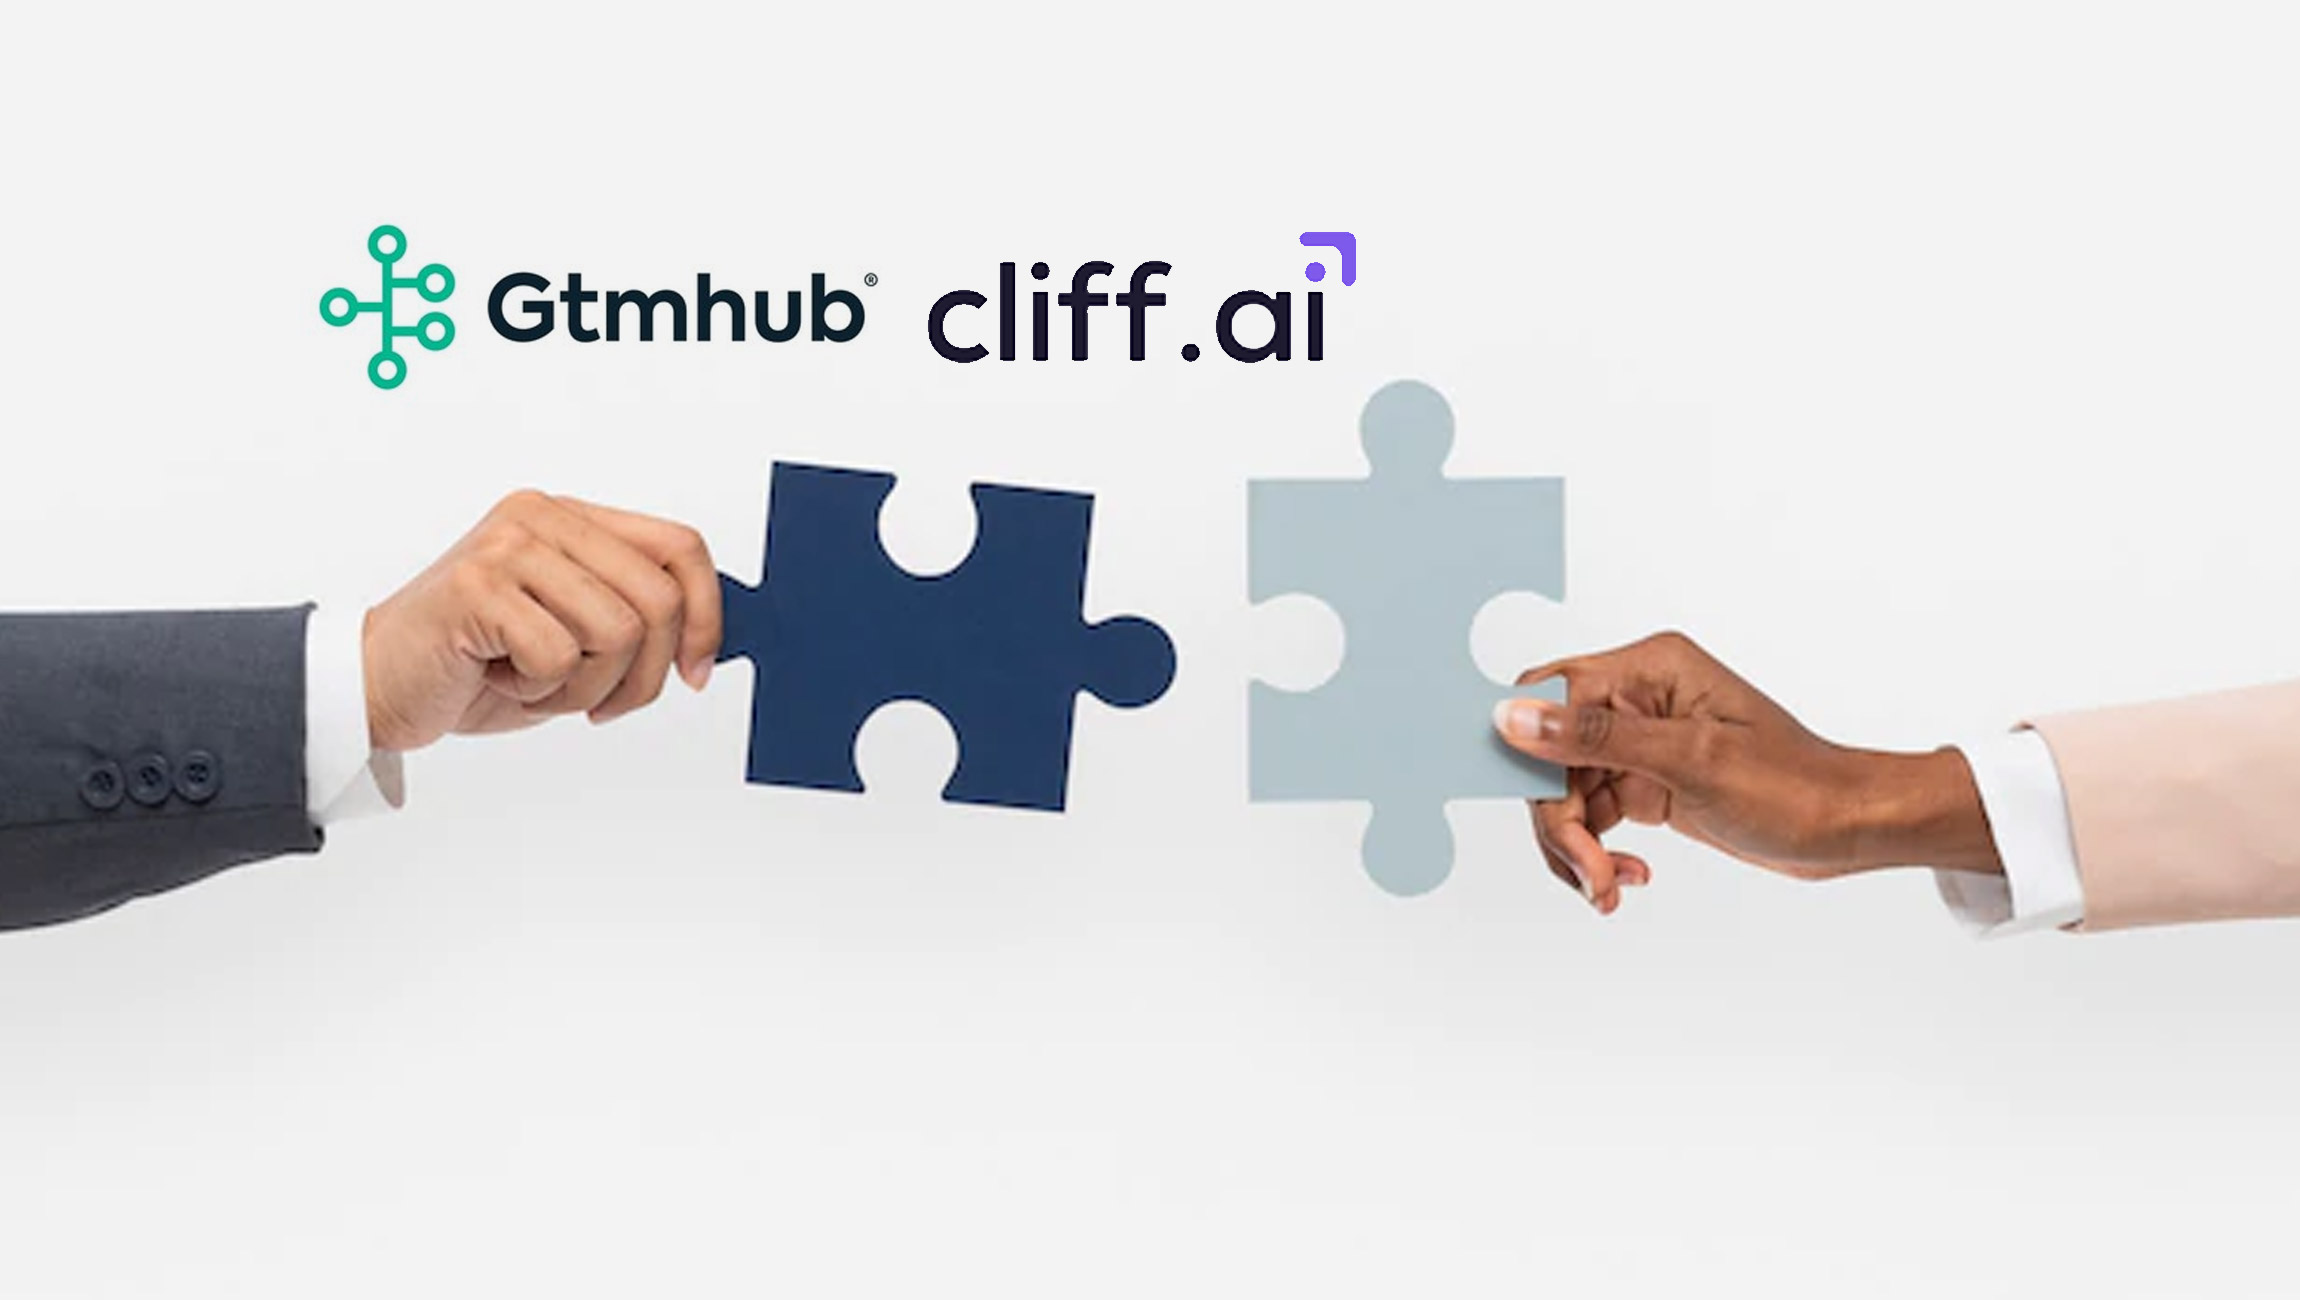 Leading Strategy Execution Platform Gtmhub Expands Offering with Acquisition of Cliff.ai